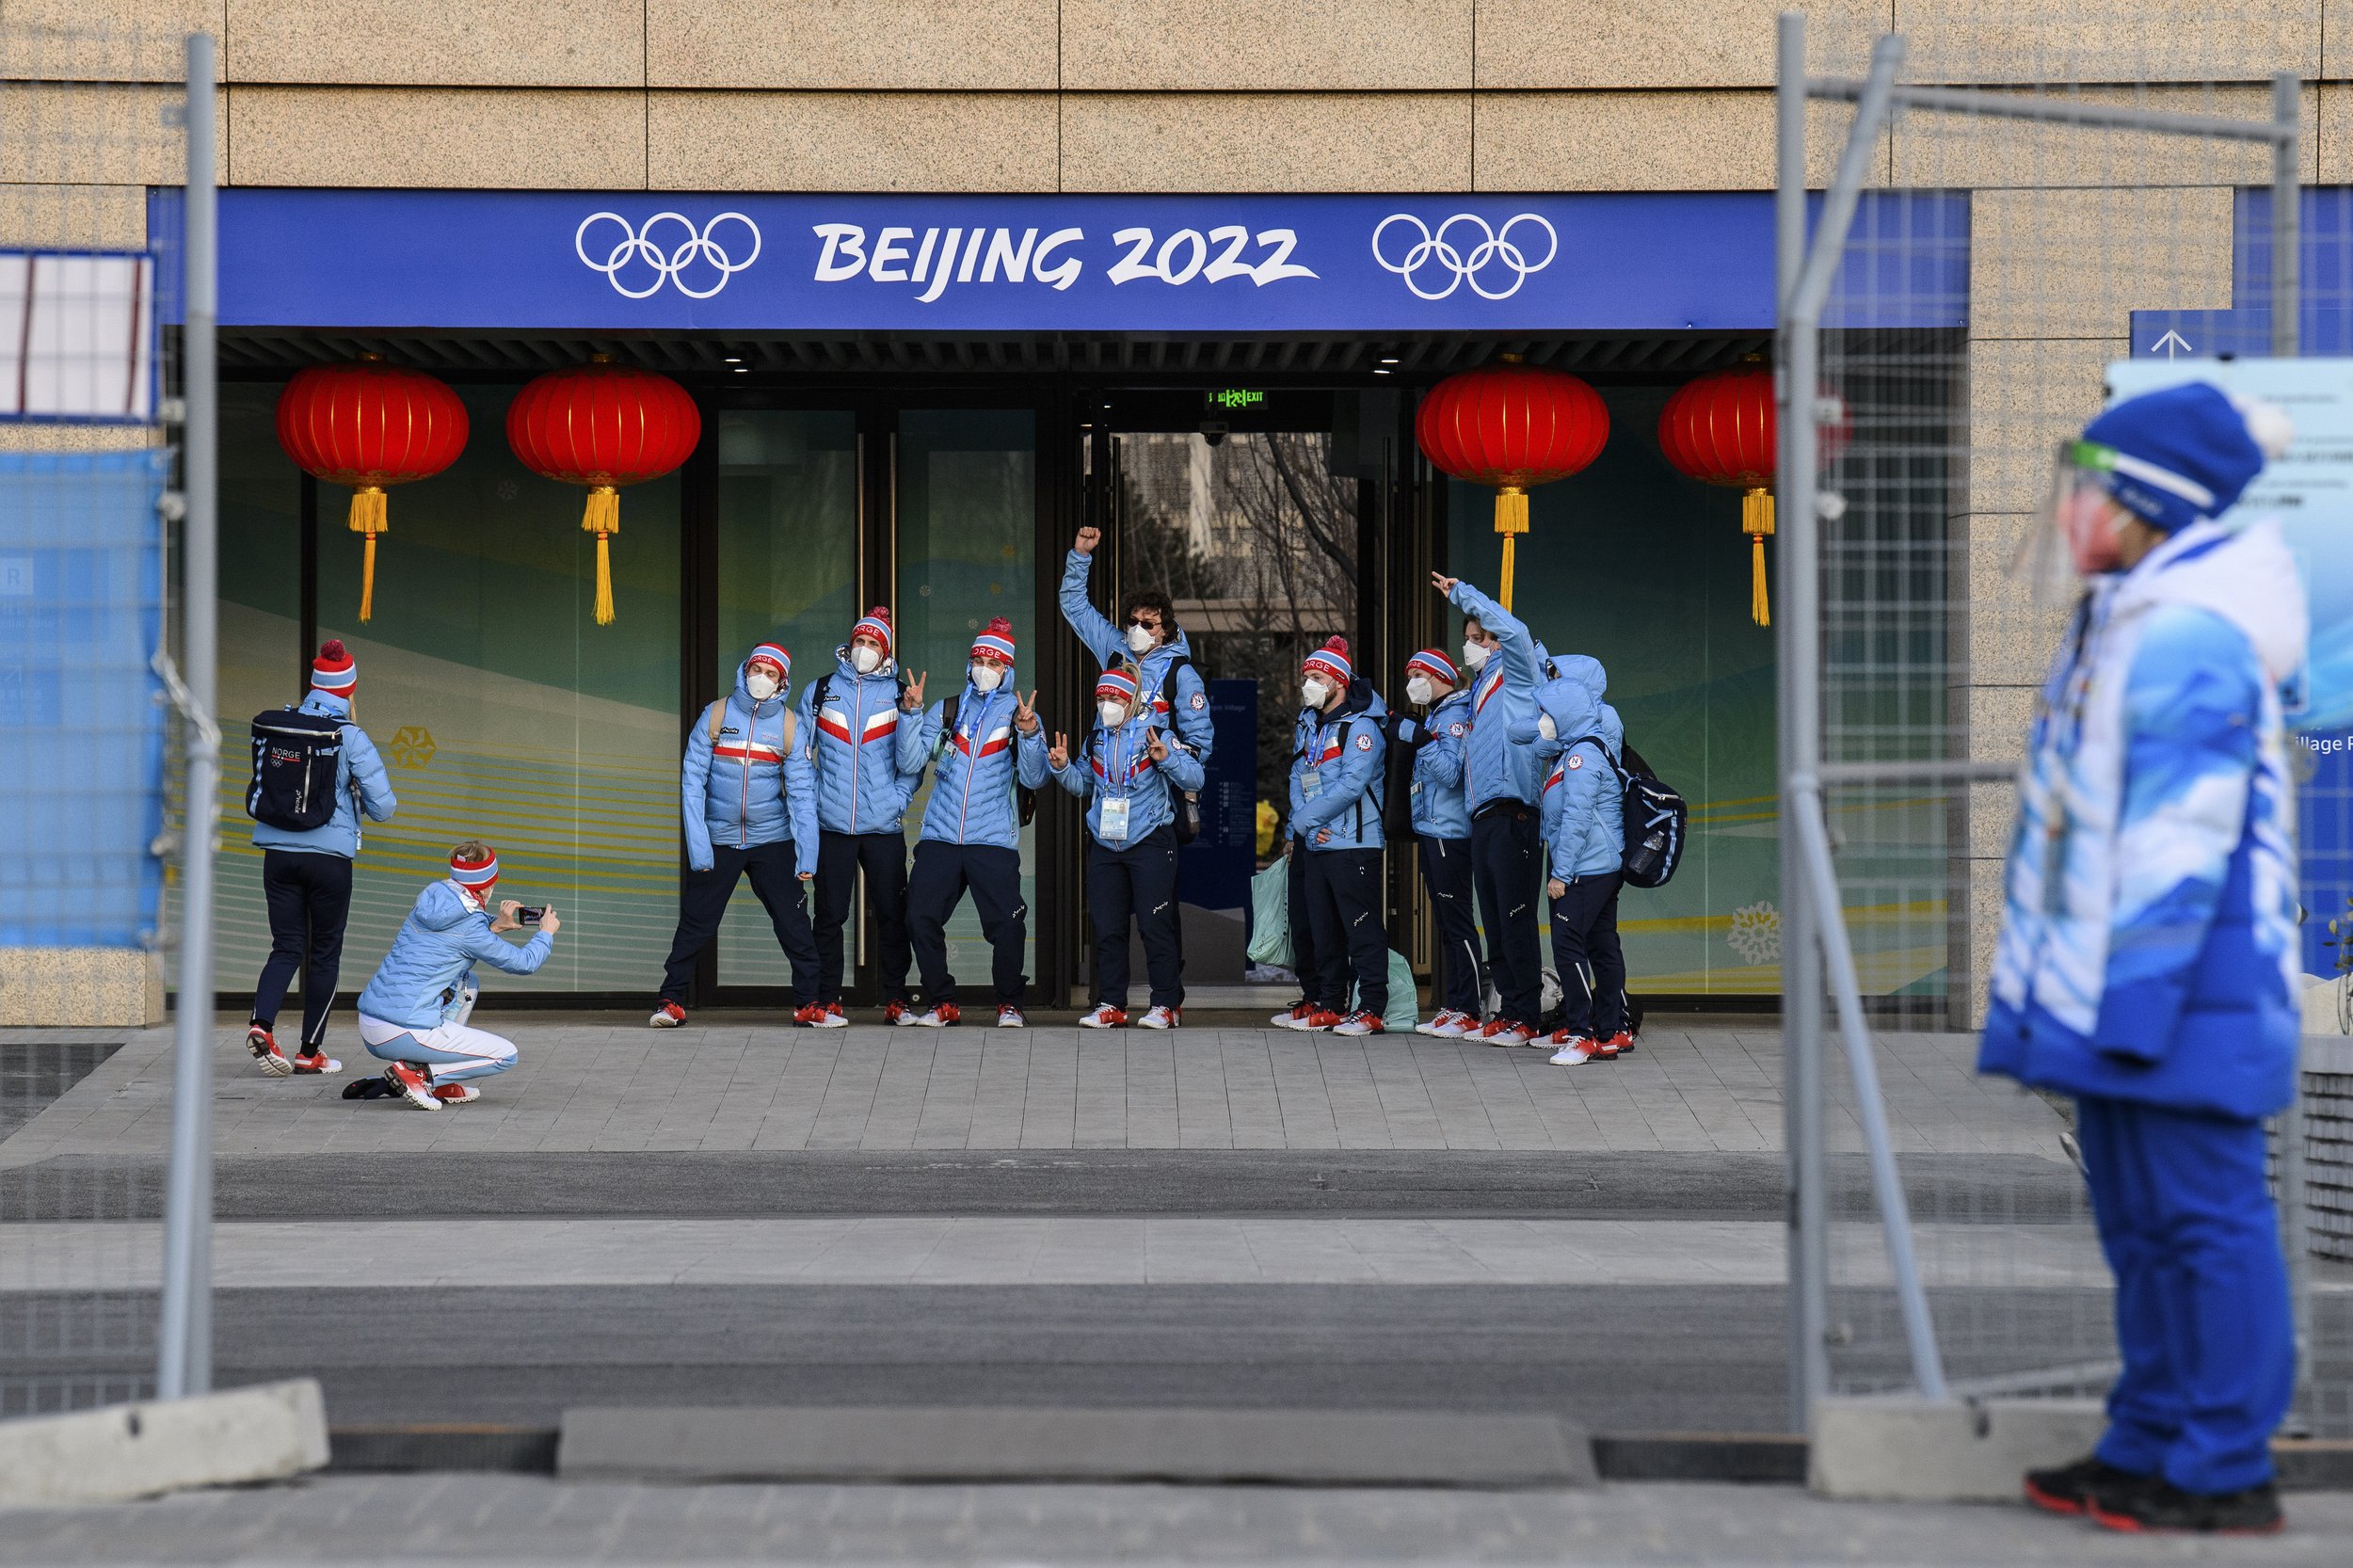  Members of Team Norway stand for photographs after entering the gate of the Olympic Village ahead of the 2022 Winter Olympics, Tuesday, Feb. 1, 2022, in Beijing. (Anthony Wallace/Pool Photo via AP) 